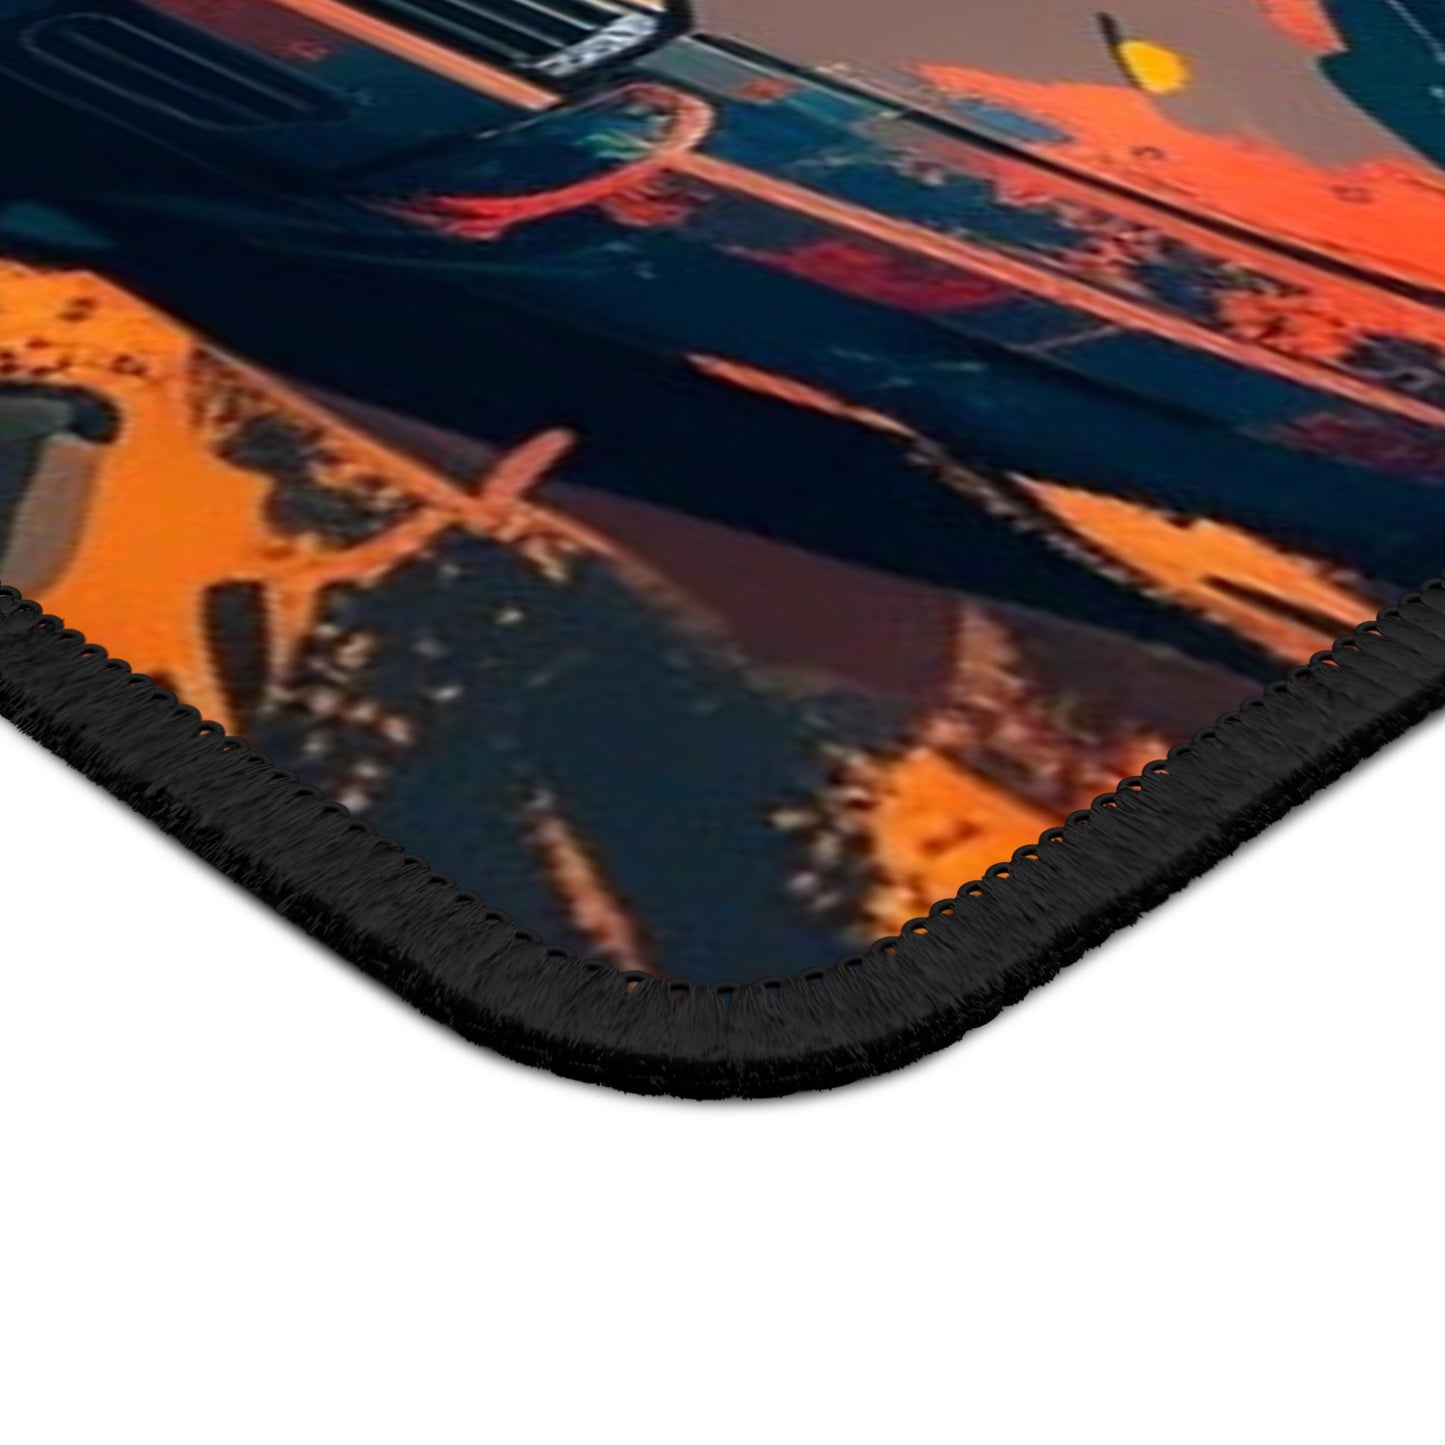 Gaming Mouse Pad  Porsche Abstract 3